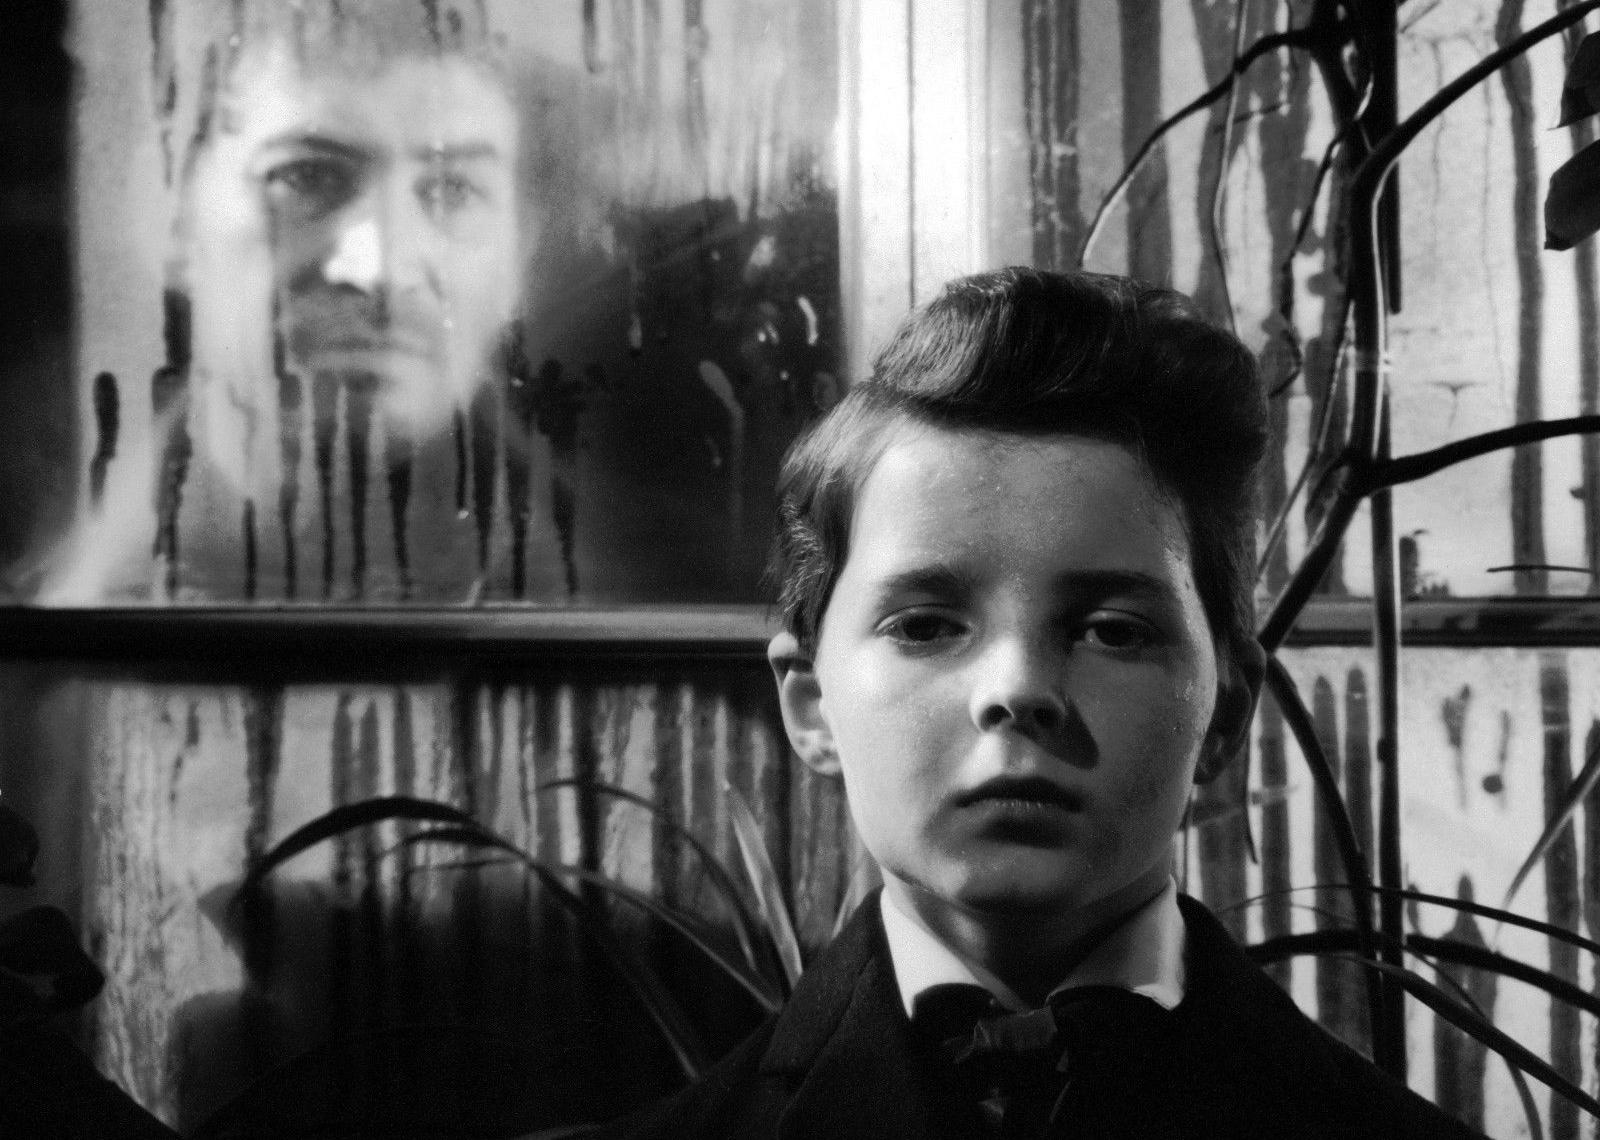 A ghostly man looking through a window at a young boy in a coat and tie.